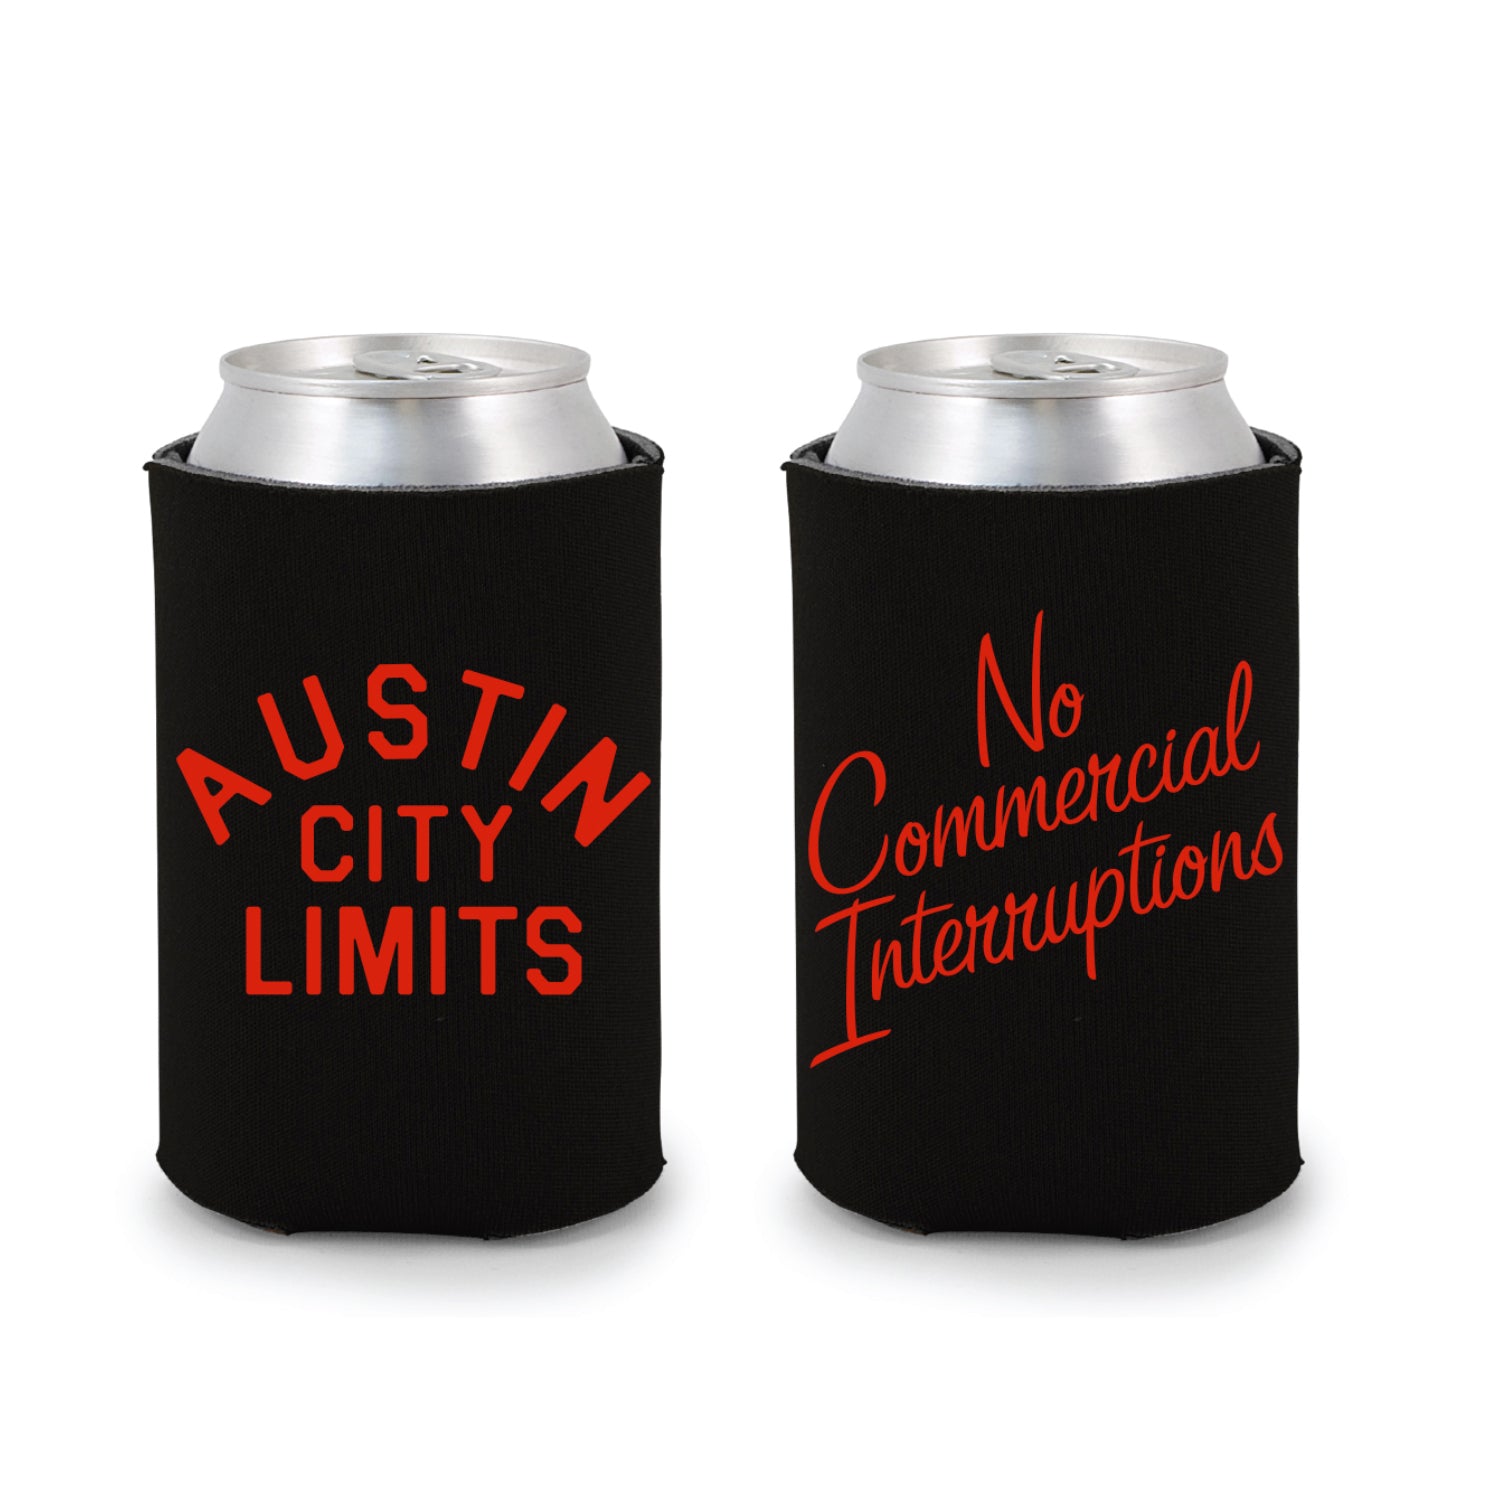 Austin City Limits "No Commercial Interruptions" Black Collapsible Can Koozie